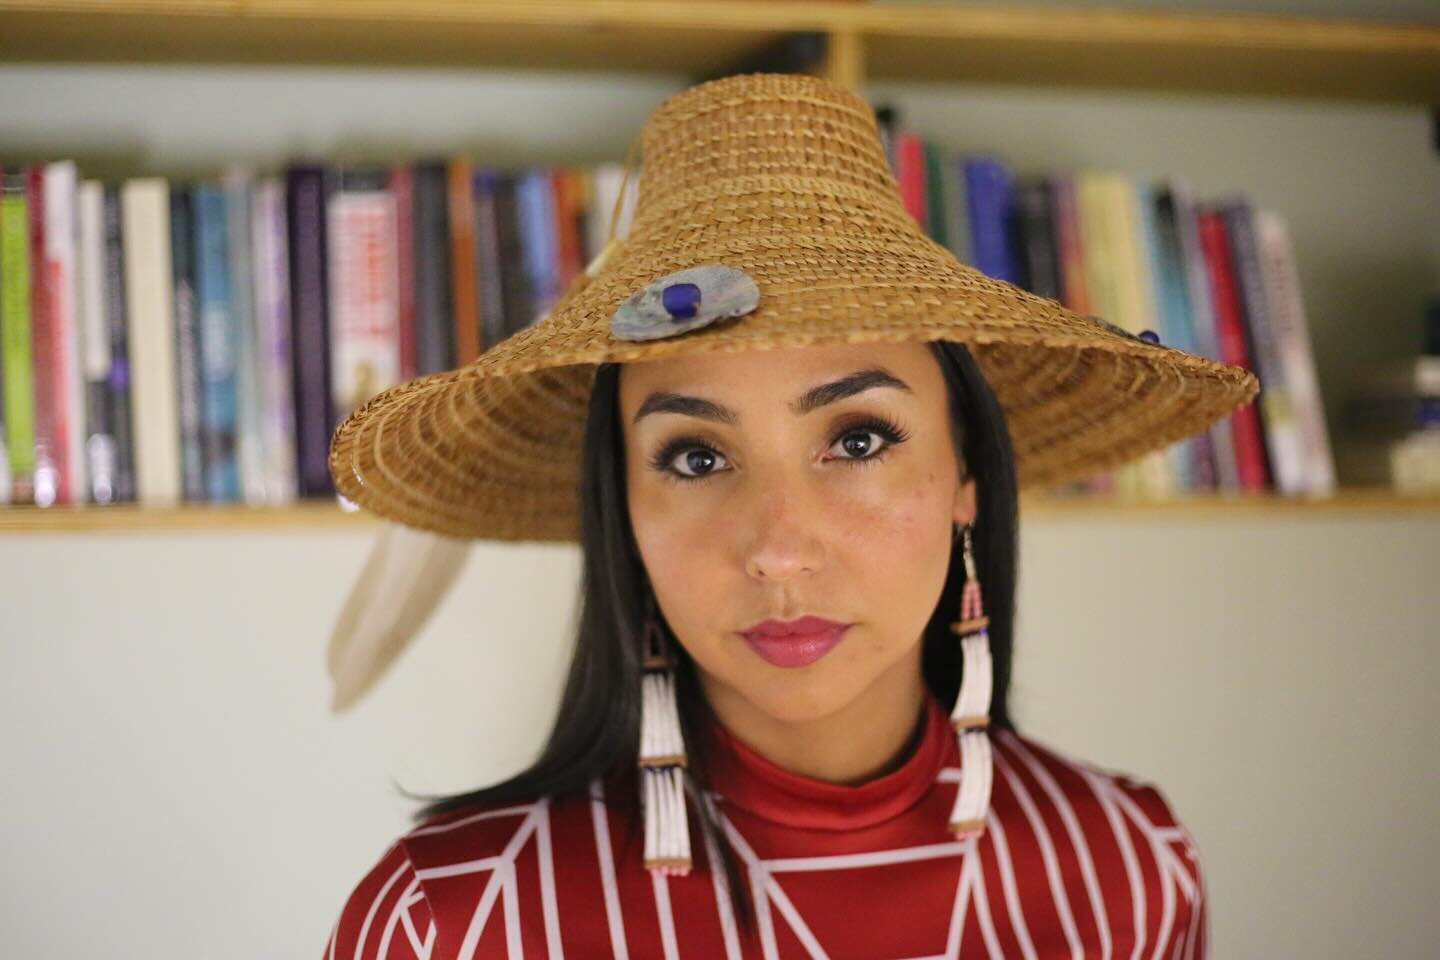 &laquo;&nbsp;One should either be a work of art, or wear a work of art.&nbsp;&raquo; ~ Oscar Wilde

Proud to have my new da̱ntsa̱m (cedar bark hat), beautifully woven by Dza̱mdza̱silog̱wa Gloria Hunt, a commissioned graduation gift made with red and 